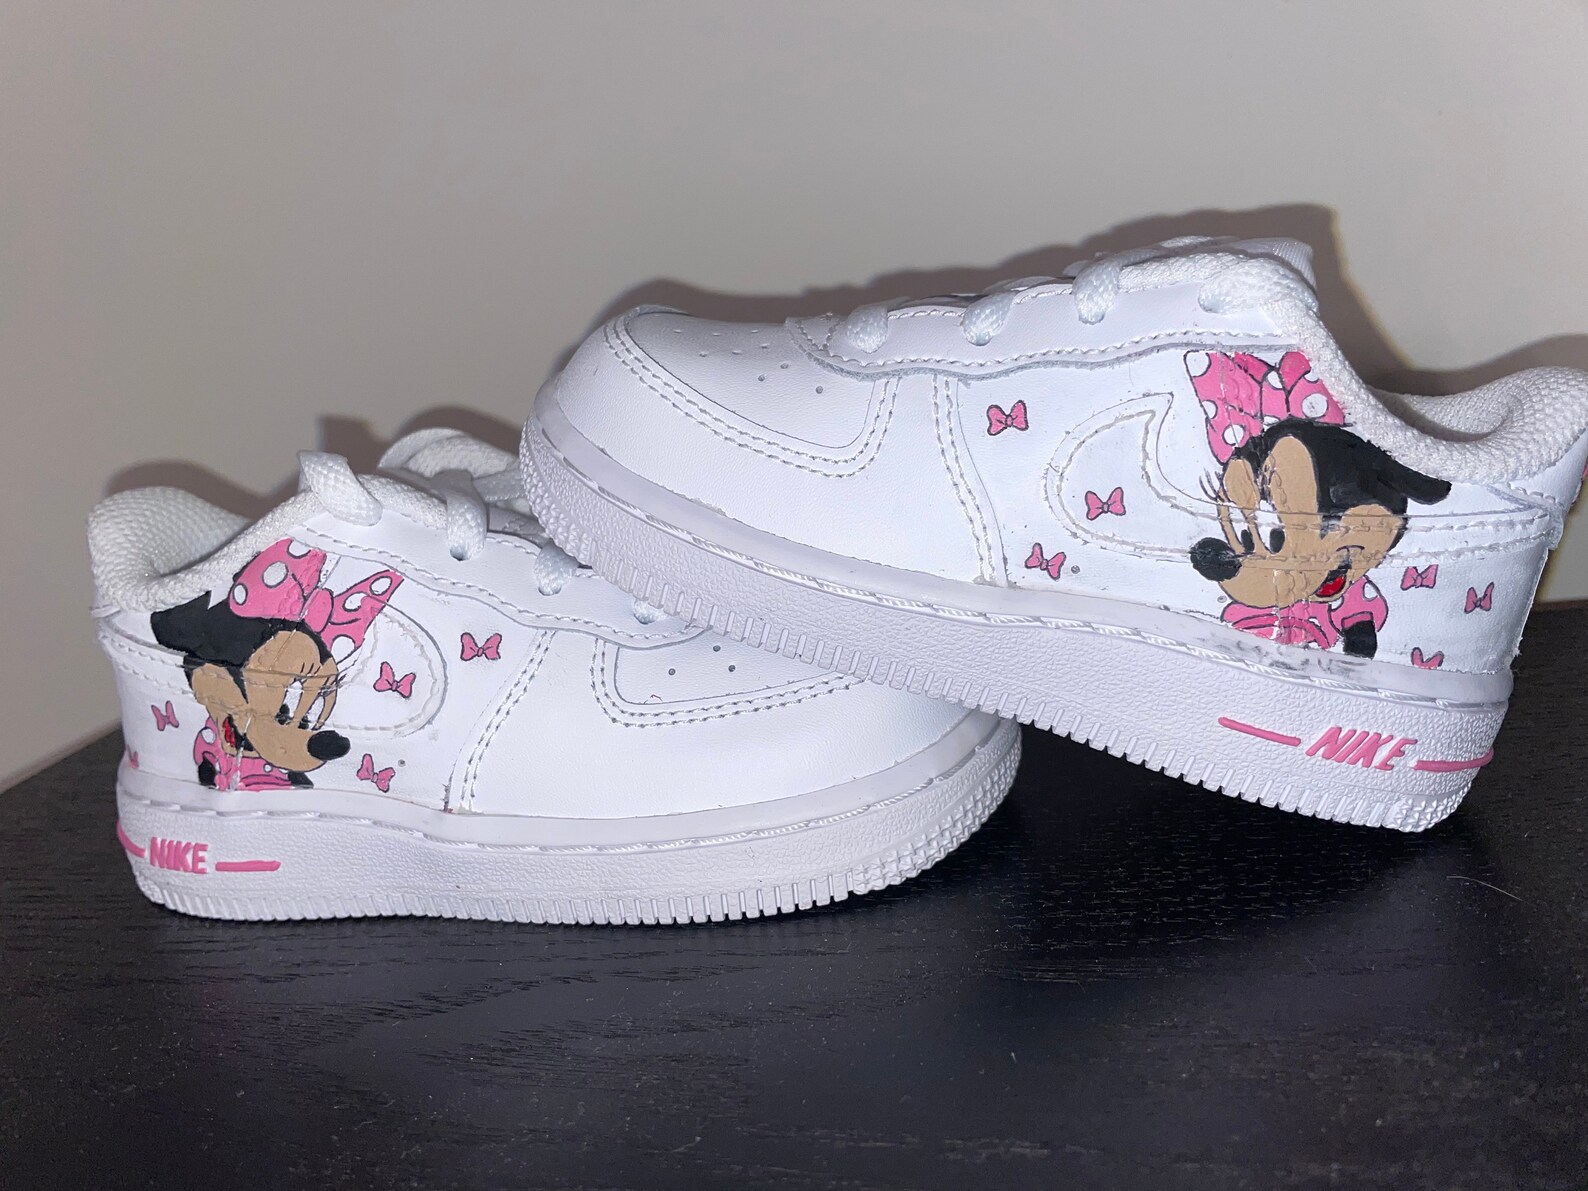 Minnie Mouse Air Force 1s Hand-painted Custom Shoes | Etsy